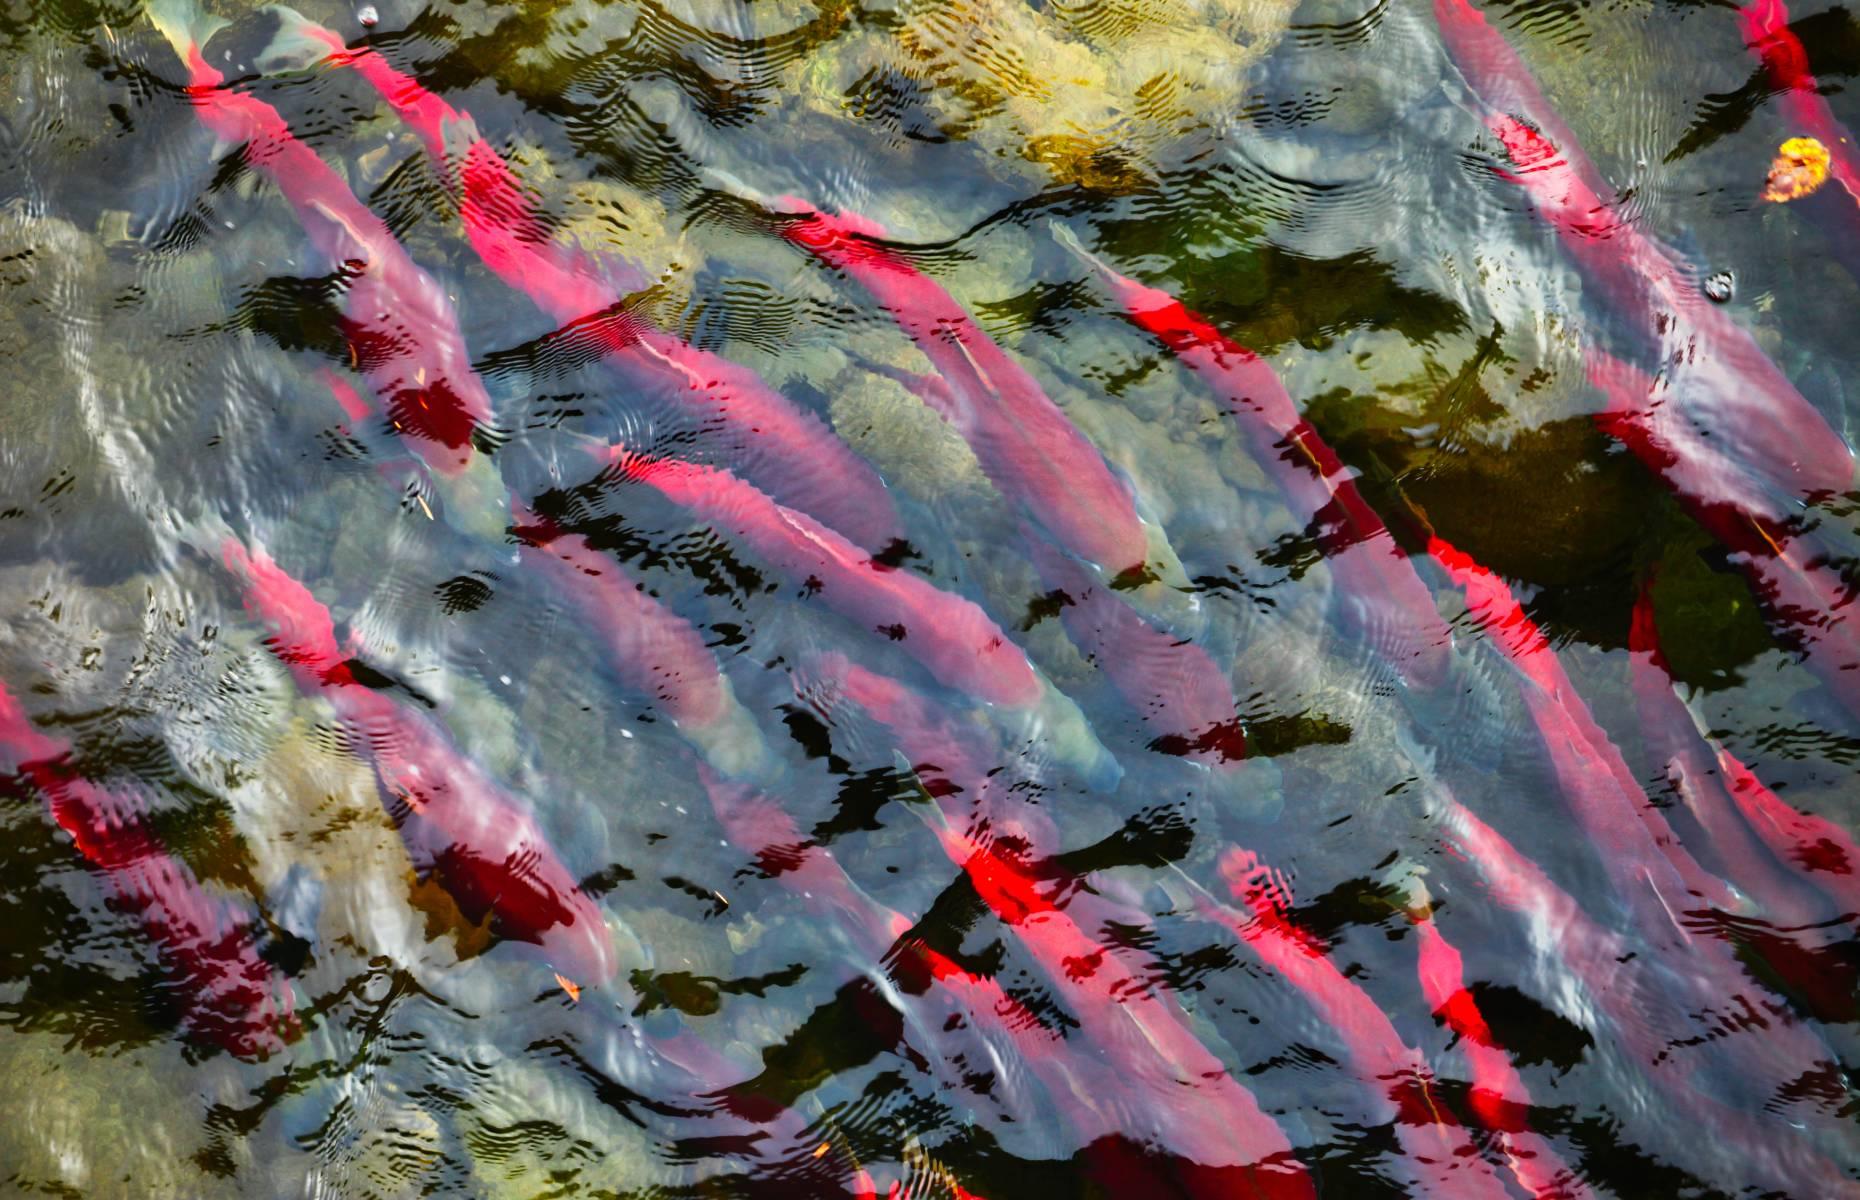 One of the greatest natural phenomena in the world, British Columbia’s autumn salmon run has been enthralling wildlife enthusiasts since time immemorial. It is when freshwater-born sockeye salmon return to their birthplace from the sea, journeying hundreds of miles to lay their own eggs. Not only is it amazing to see the salmon themselves, swimming valiantly upstream and quite literally running a gauntlet of threats, but also the other wildlife this spectacle attracts.